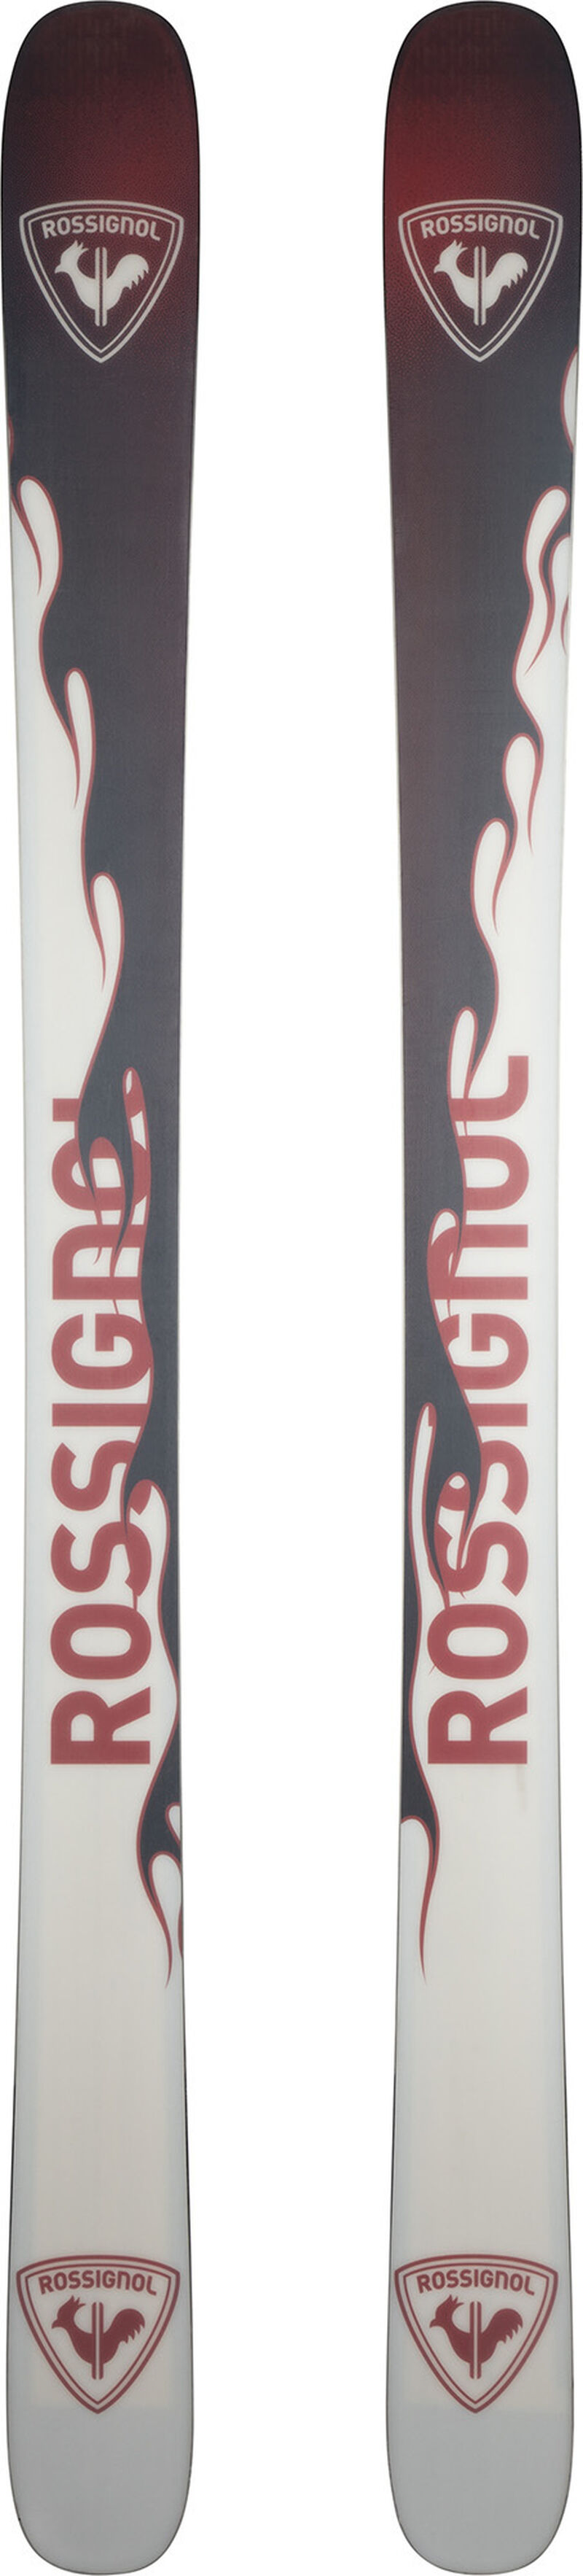 Men's freeride skis SENDER FREE 110 OPEN Max Palm Limited edition